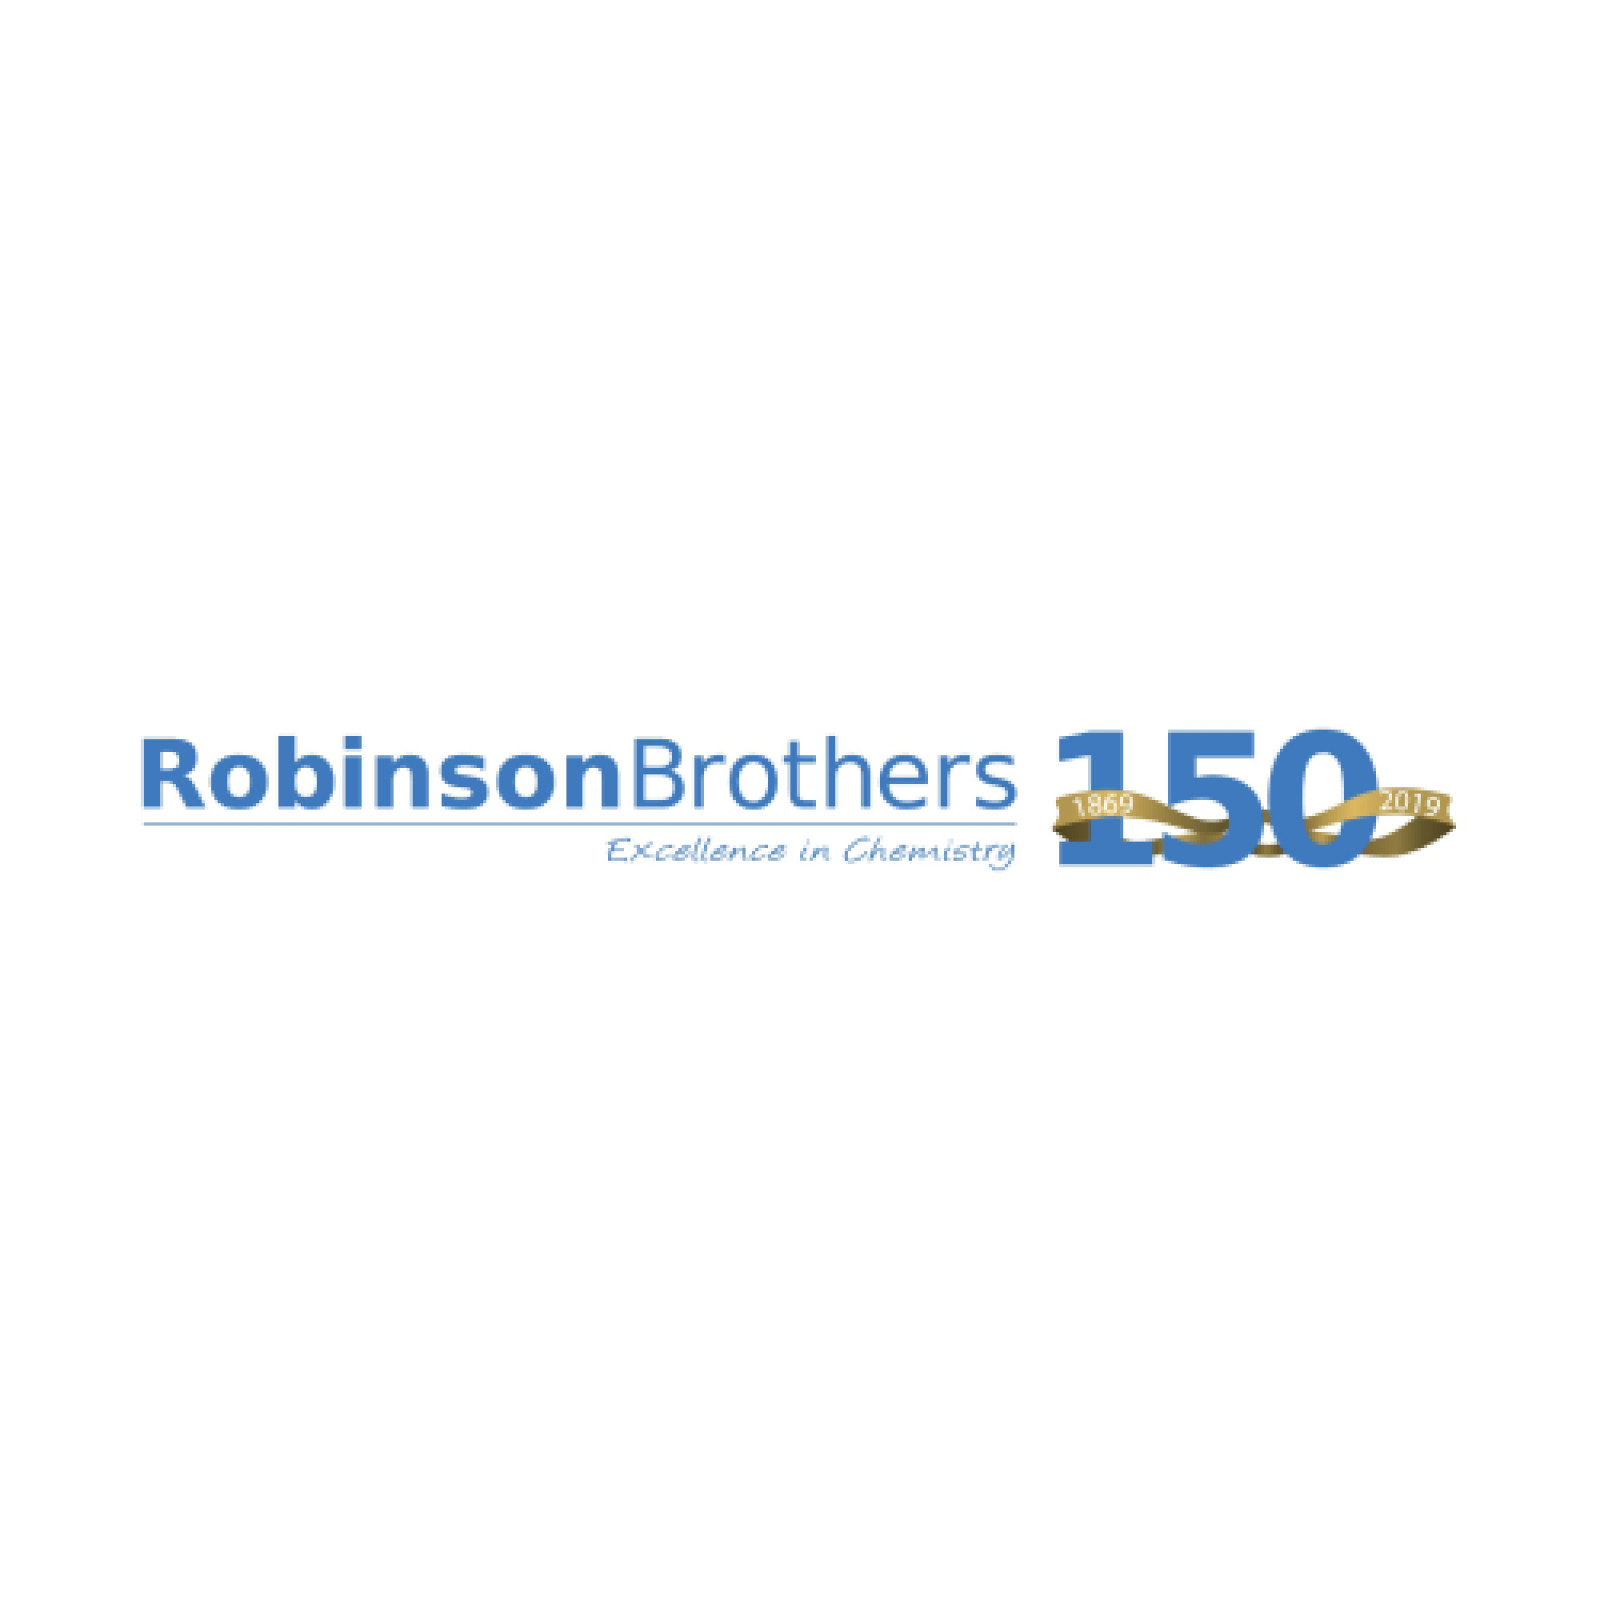 Robinson Brothers - Case Study